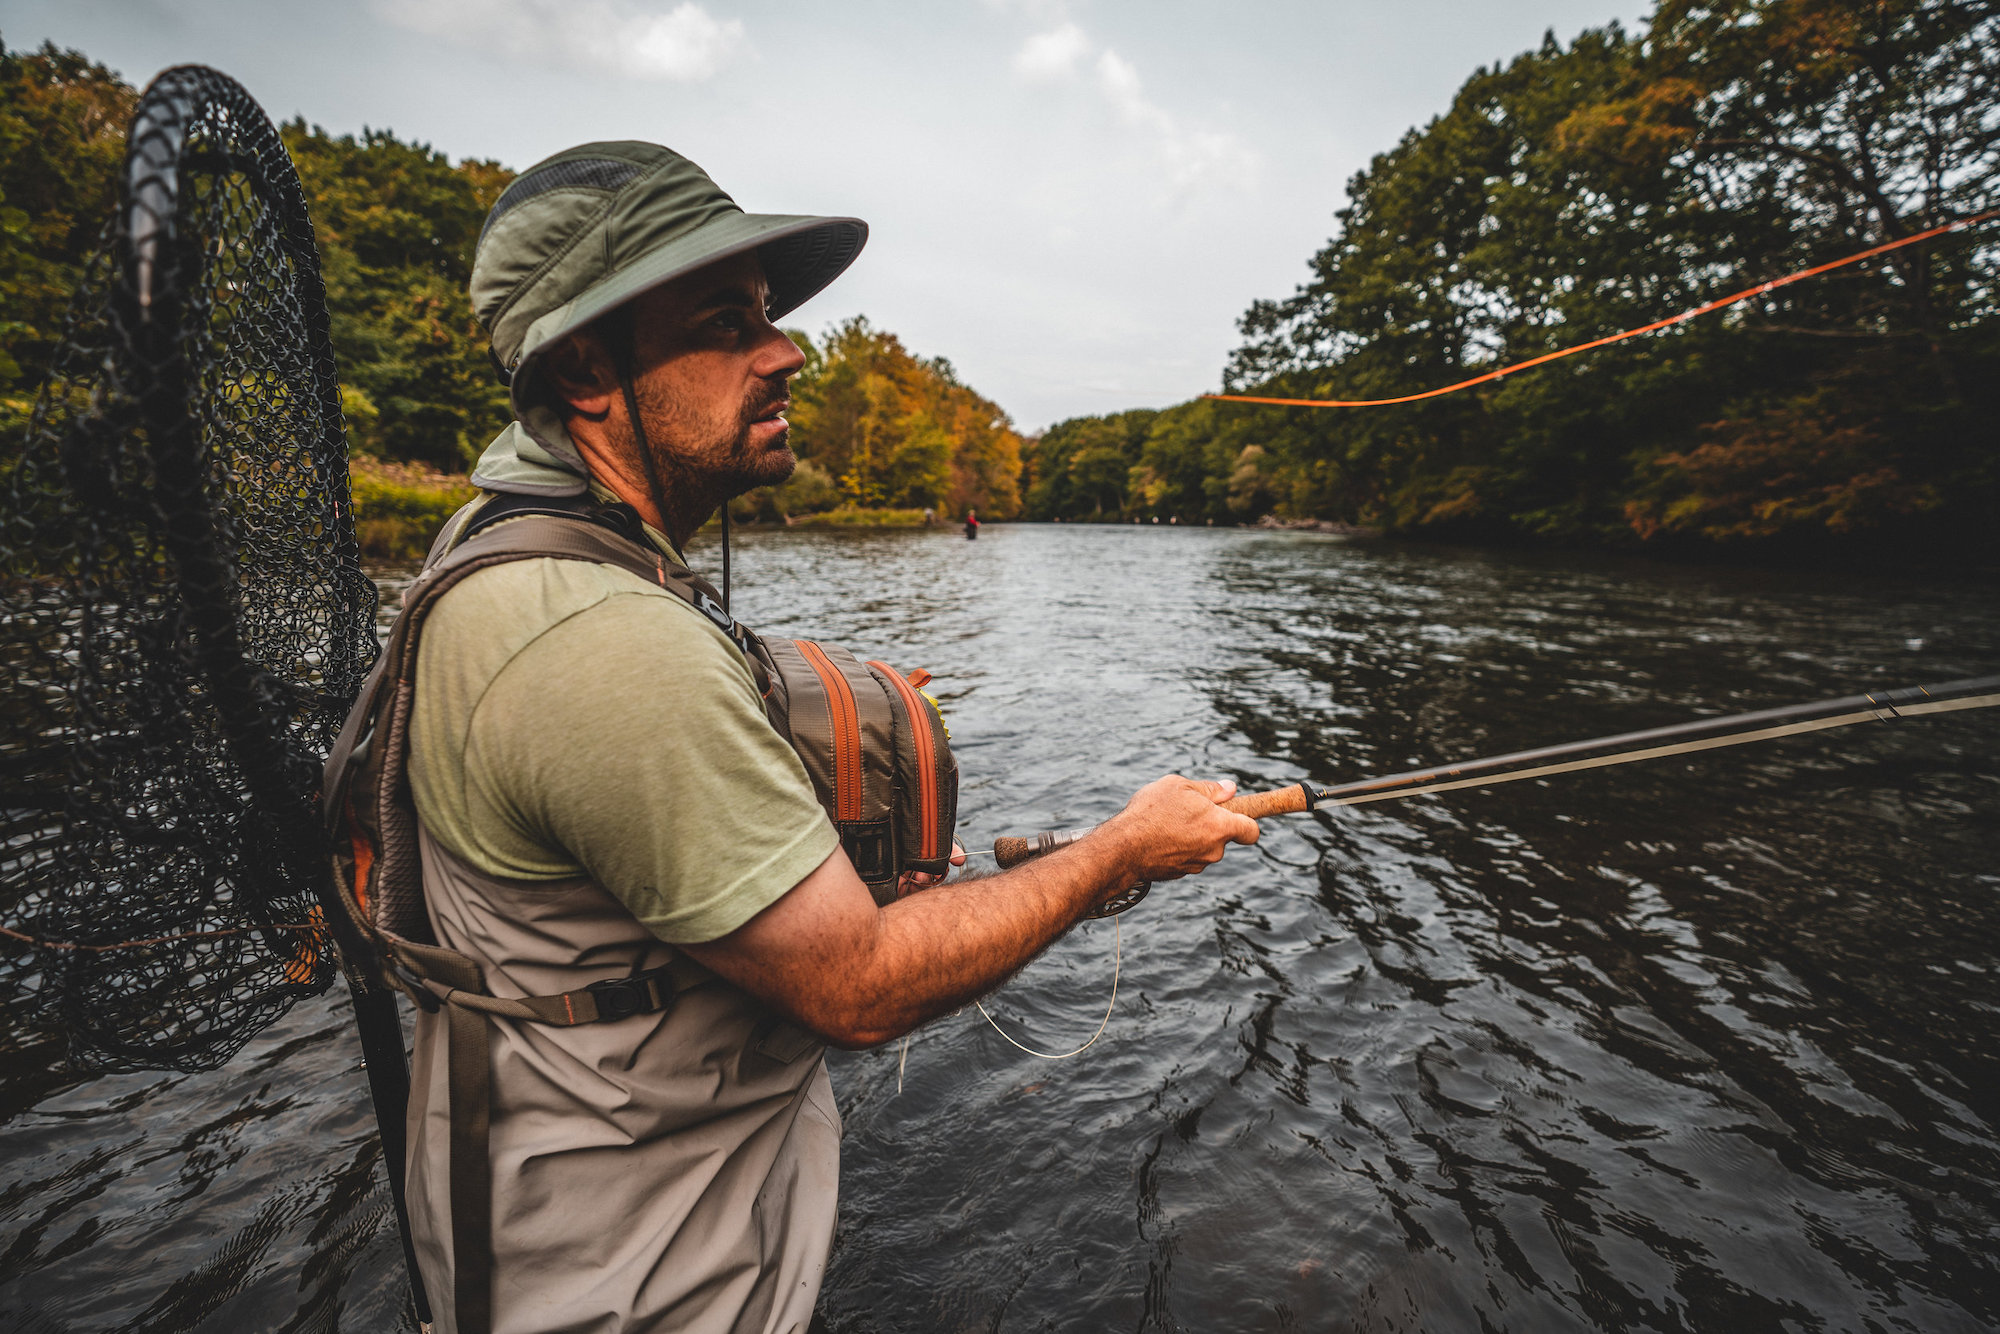 A man fishing on a river wearing a fishing vest and a net on his back